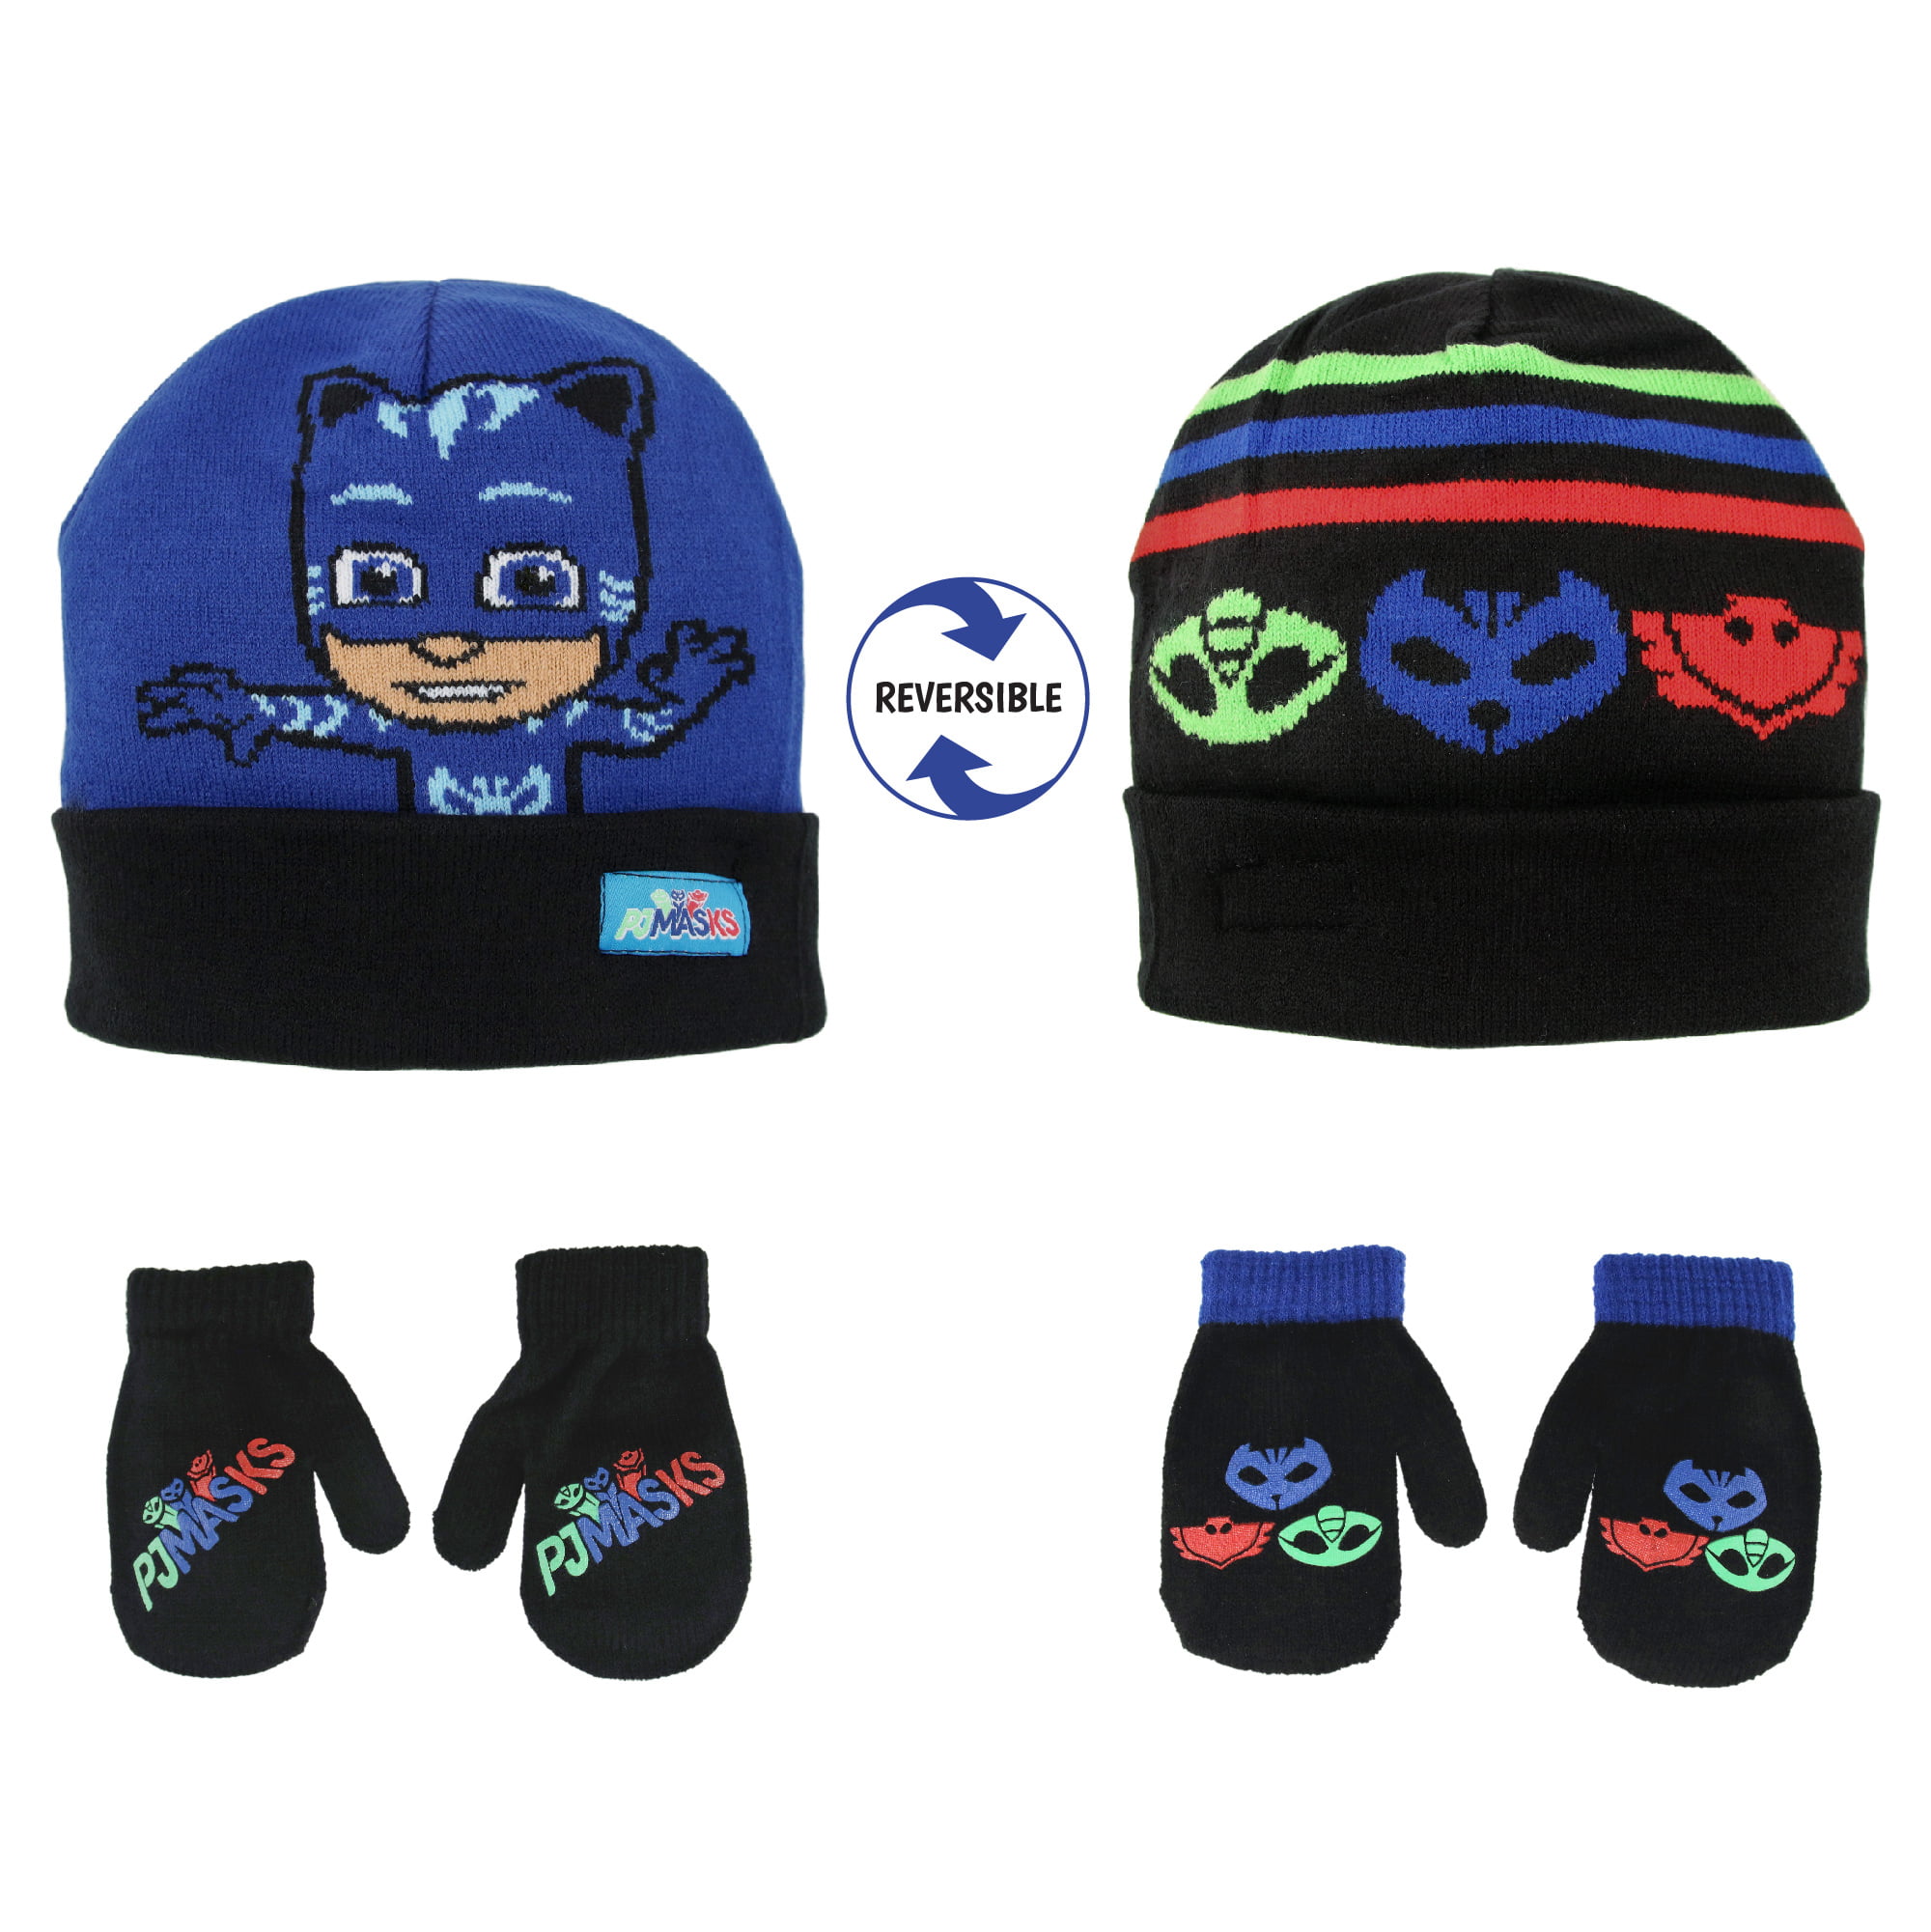 Details about  / PJMASKS ~ Combination ~ Boy/'s Insulated Mittens /& Knit Hat Set